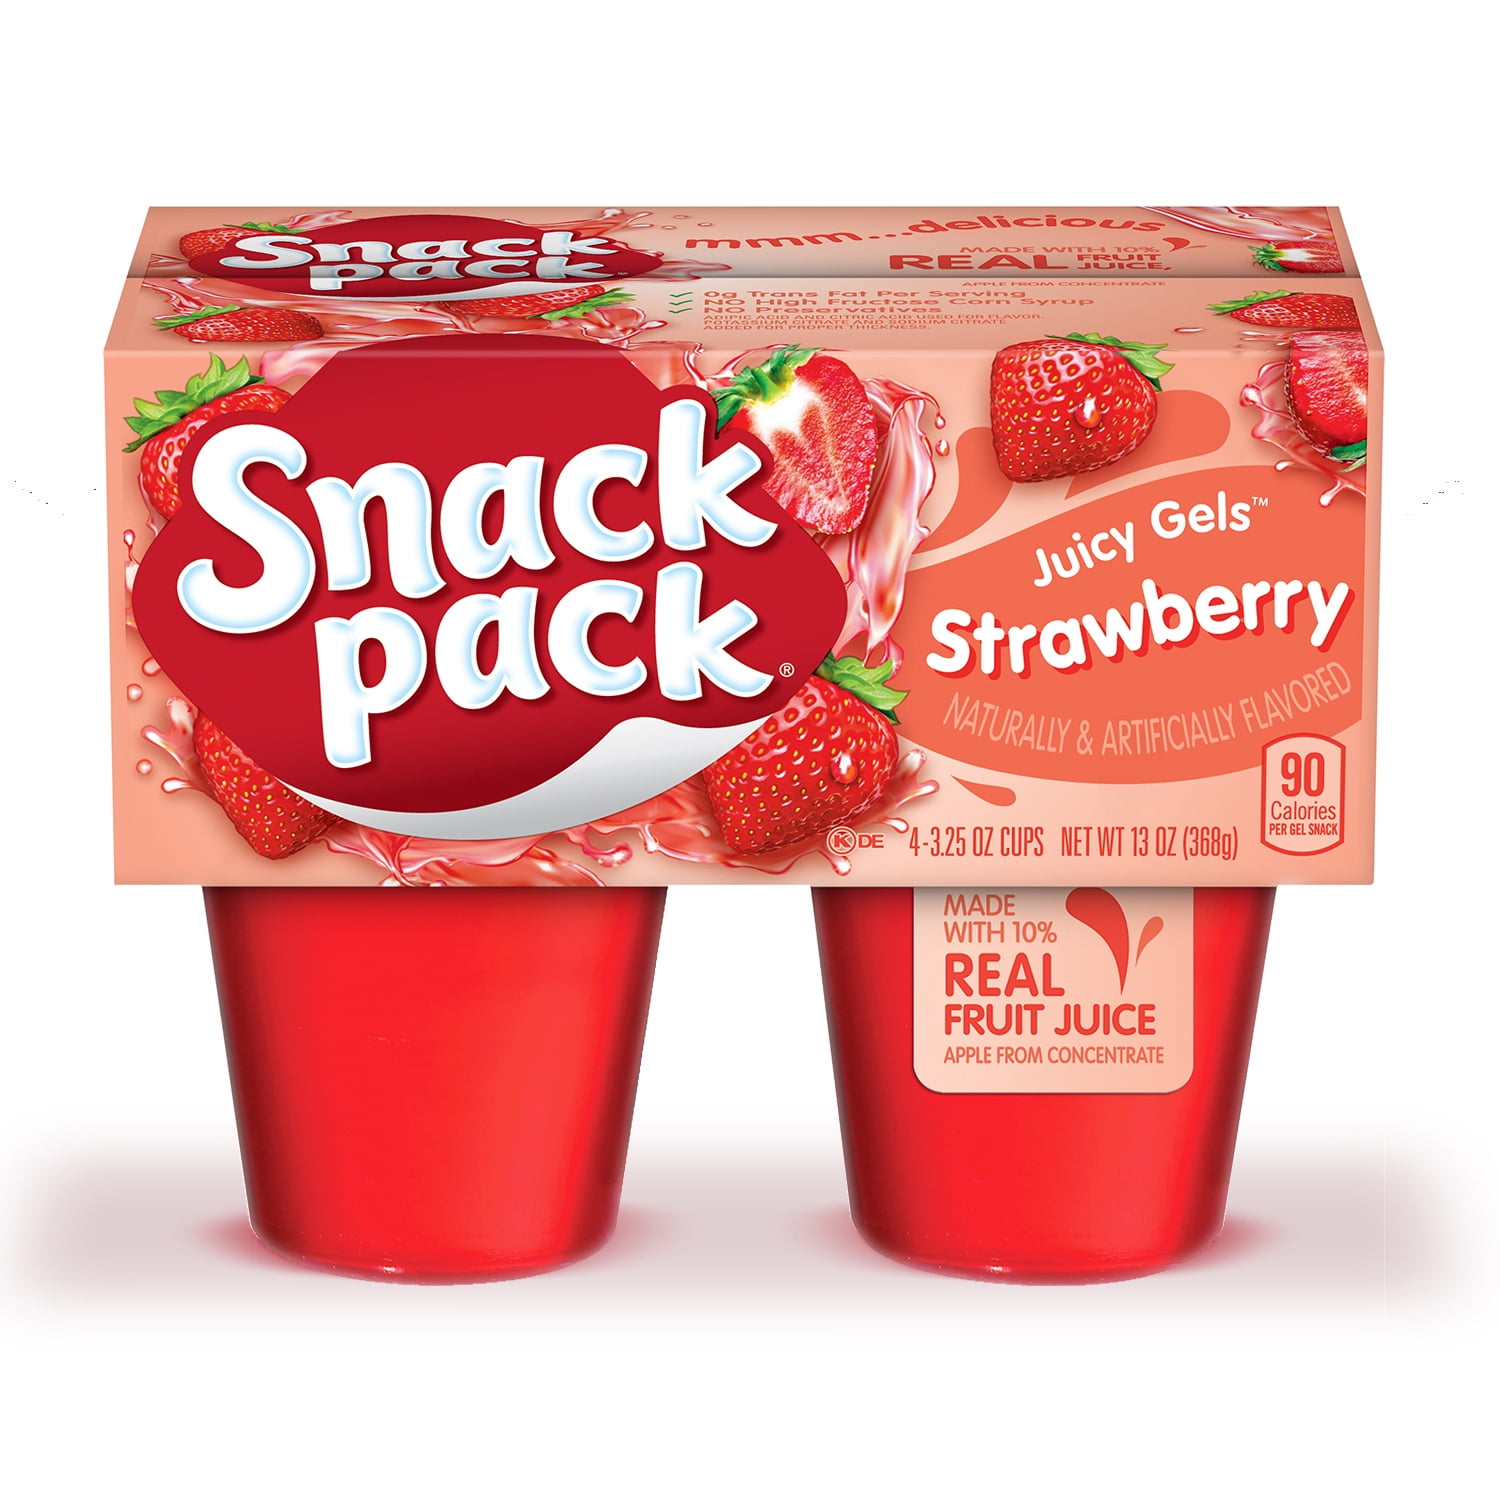 Snack Pack Strawberry Flavored Juicy Gels, 4 Count Snack Cups